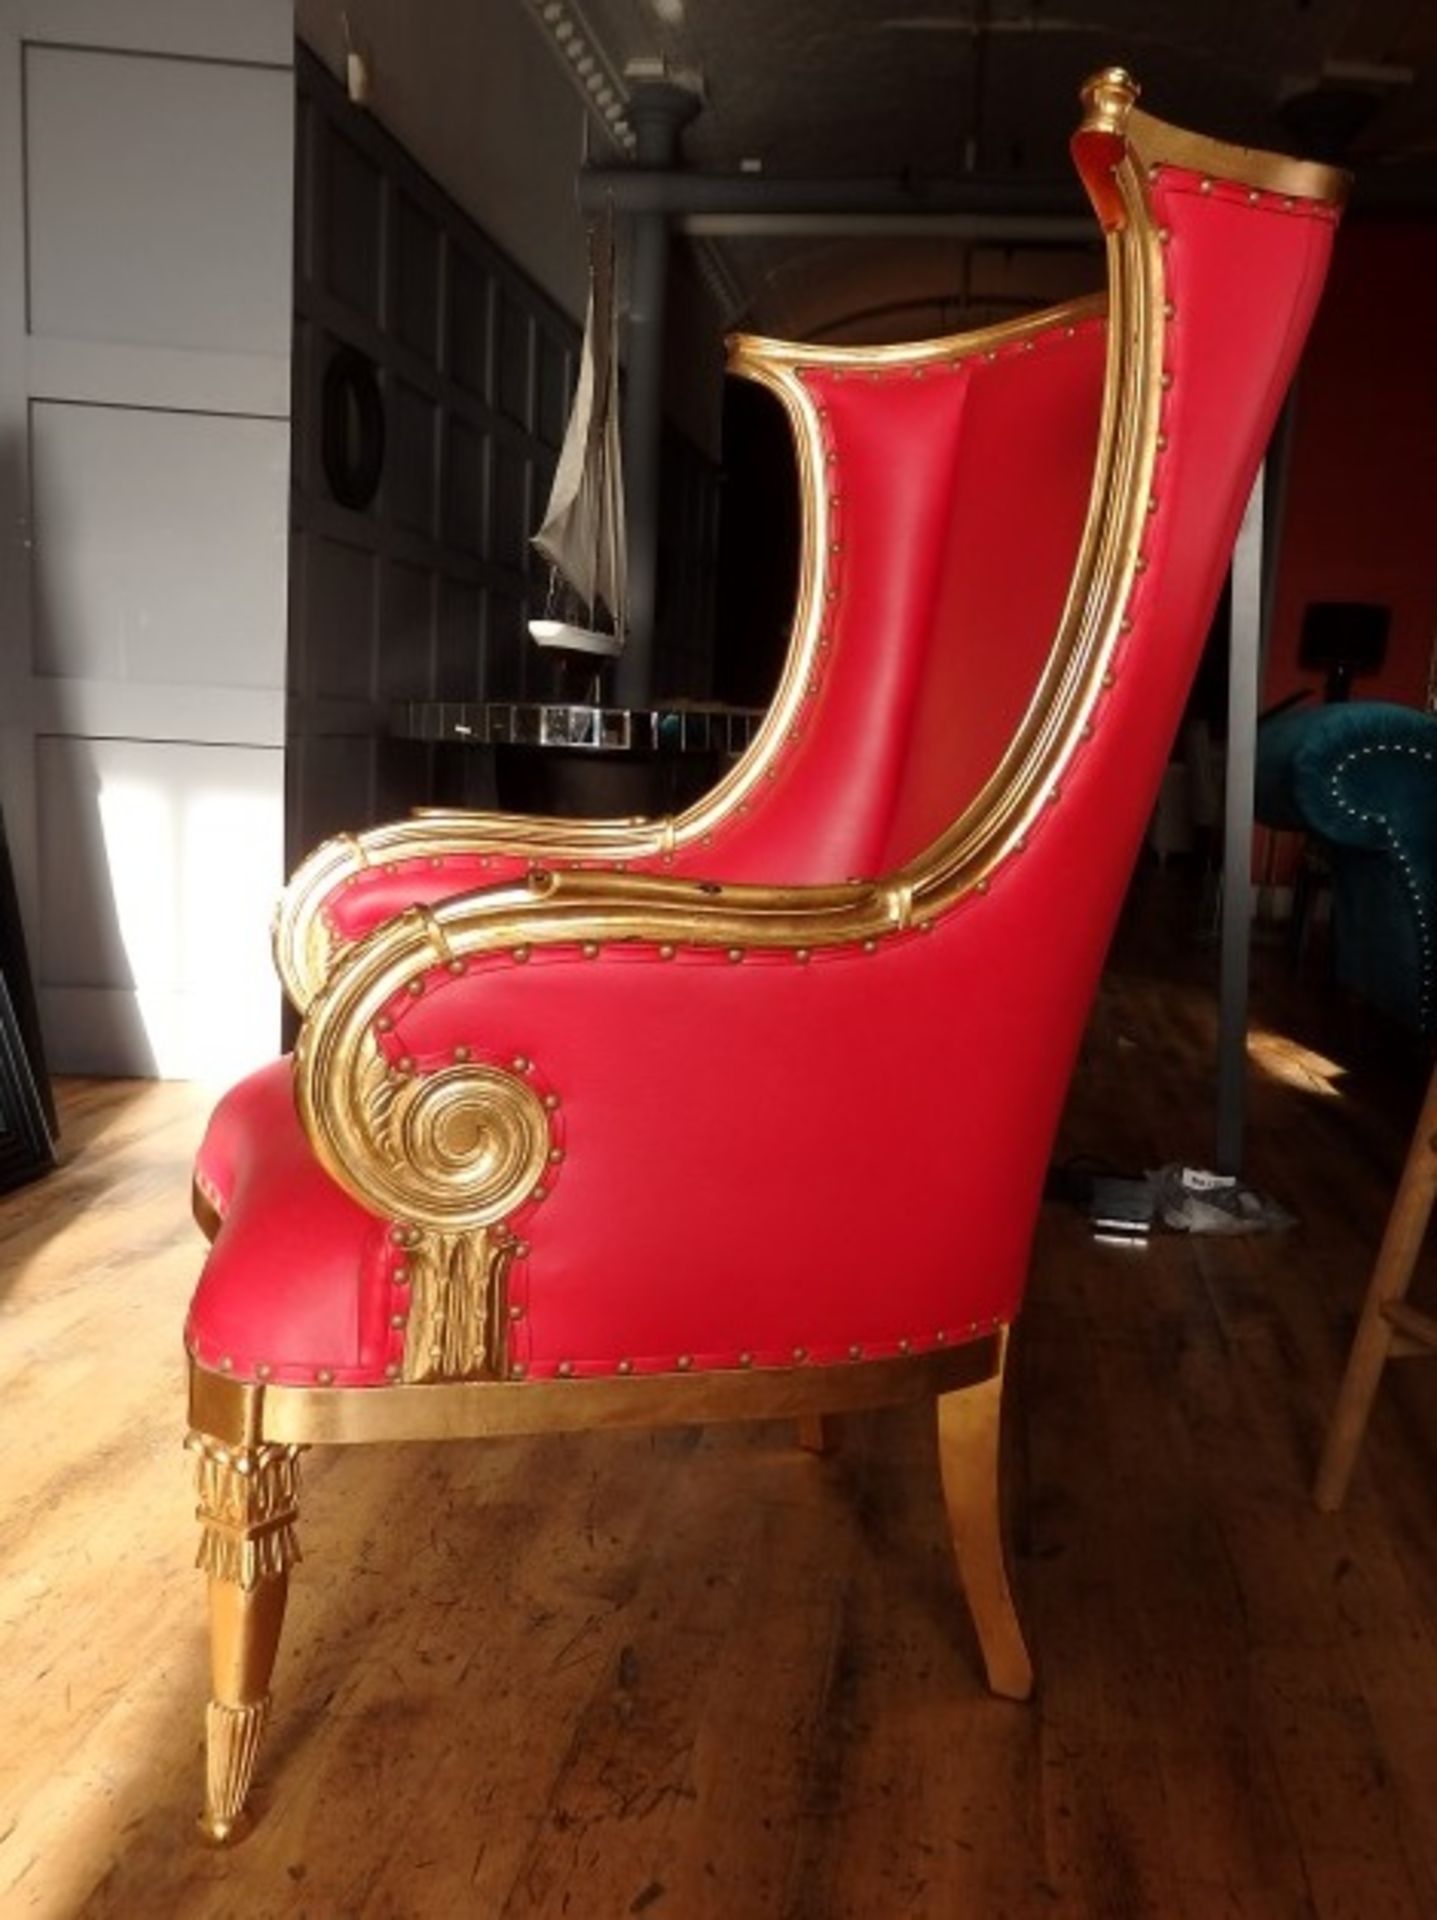 1 x Bespoke Handcrafted Reproduction Chair - Features Red Leather Studded With Gold Finish to - Image 2 of 5